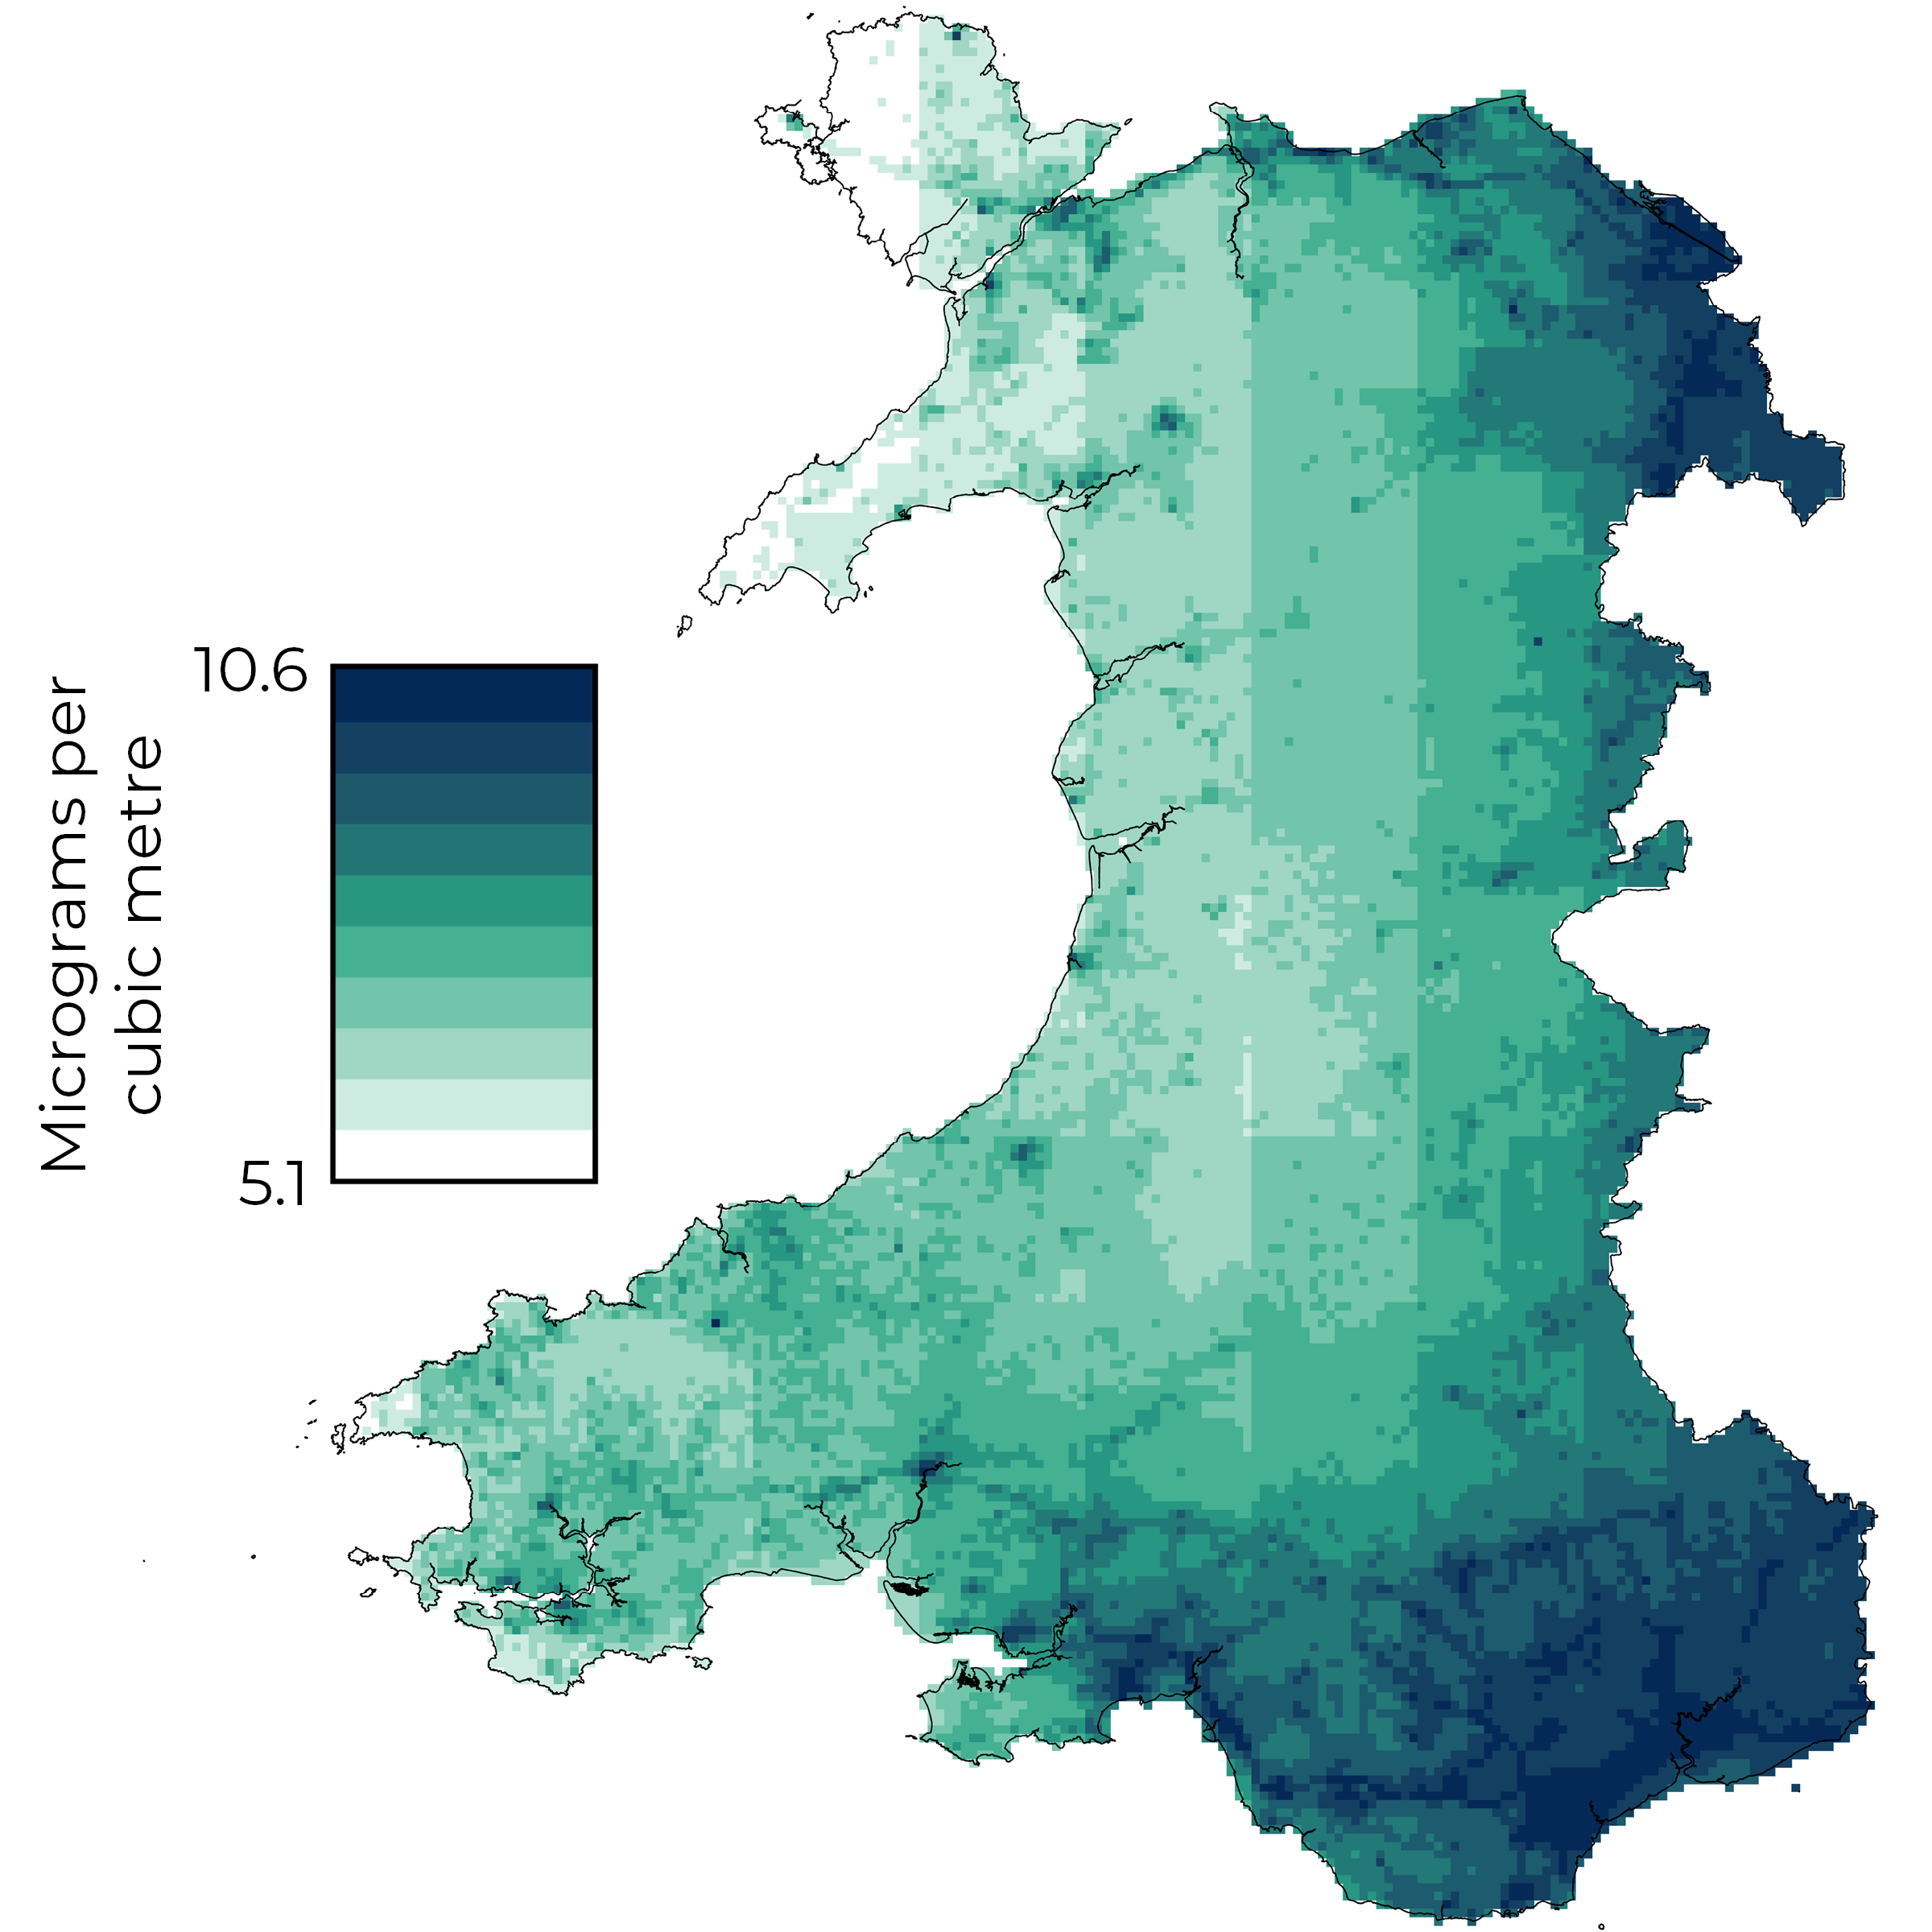 A map of Wales with colour scale showing the annual mean concentration of PM2.5 ranging from 5.1 to 10.6 micrograms per cubic metre. Similar to PM10, the lowest concentrations are in mid and north-west Wales and the highest are in south-east and north-east Wales as well as in urban areas and along major roads. In contrast to PM10, PM2.5 has a smoother distribution that changes more gradually over distance.